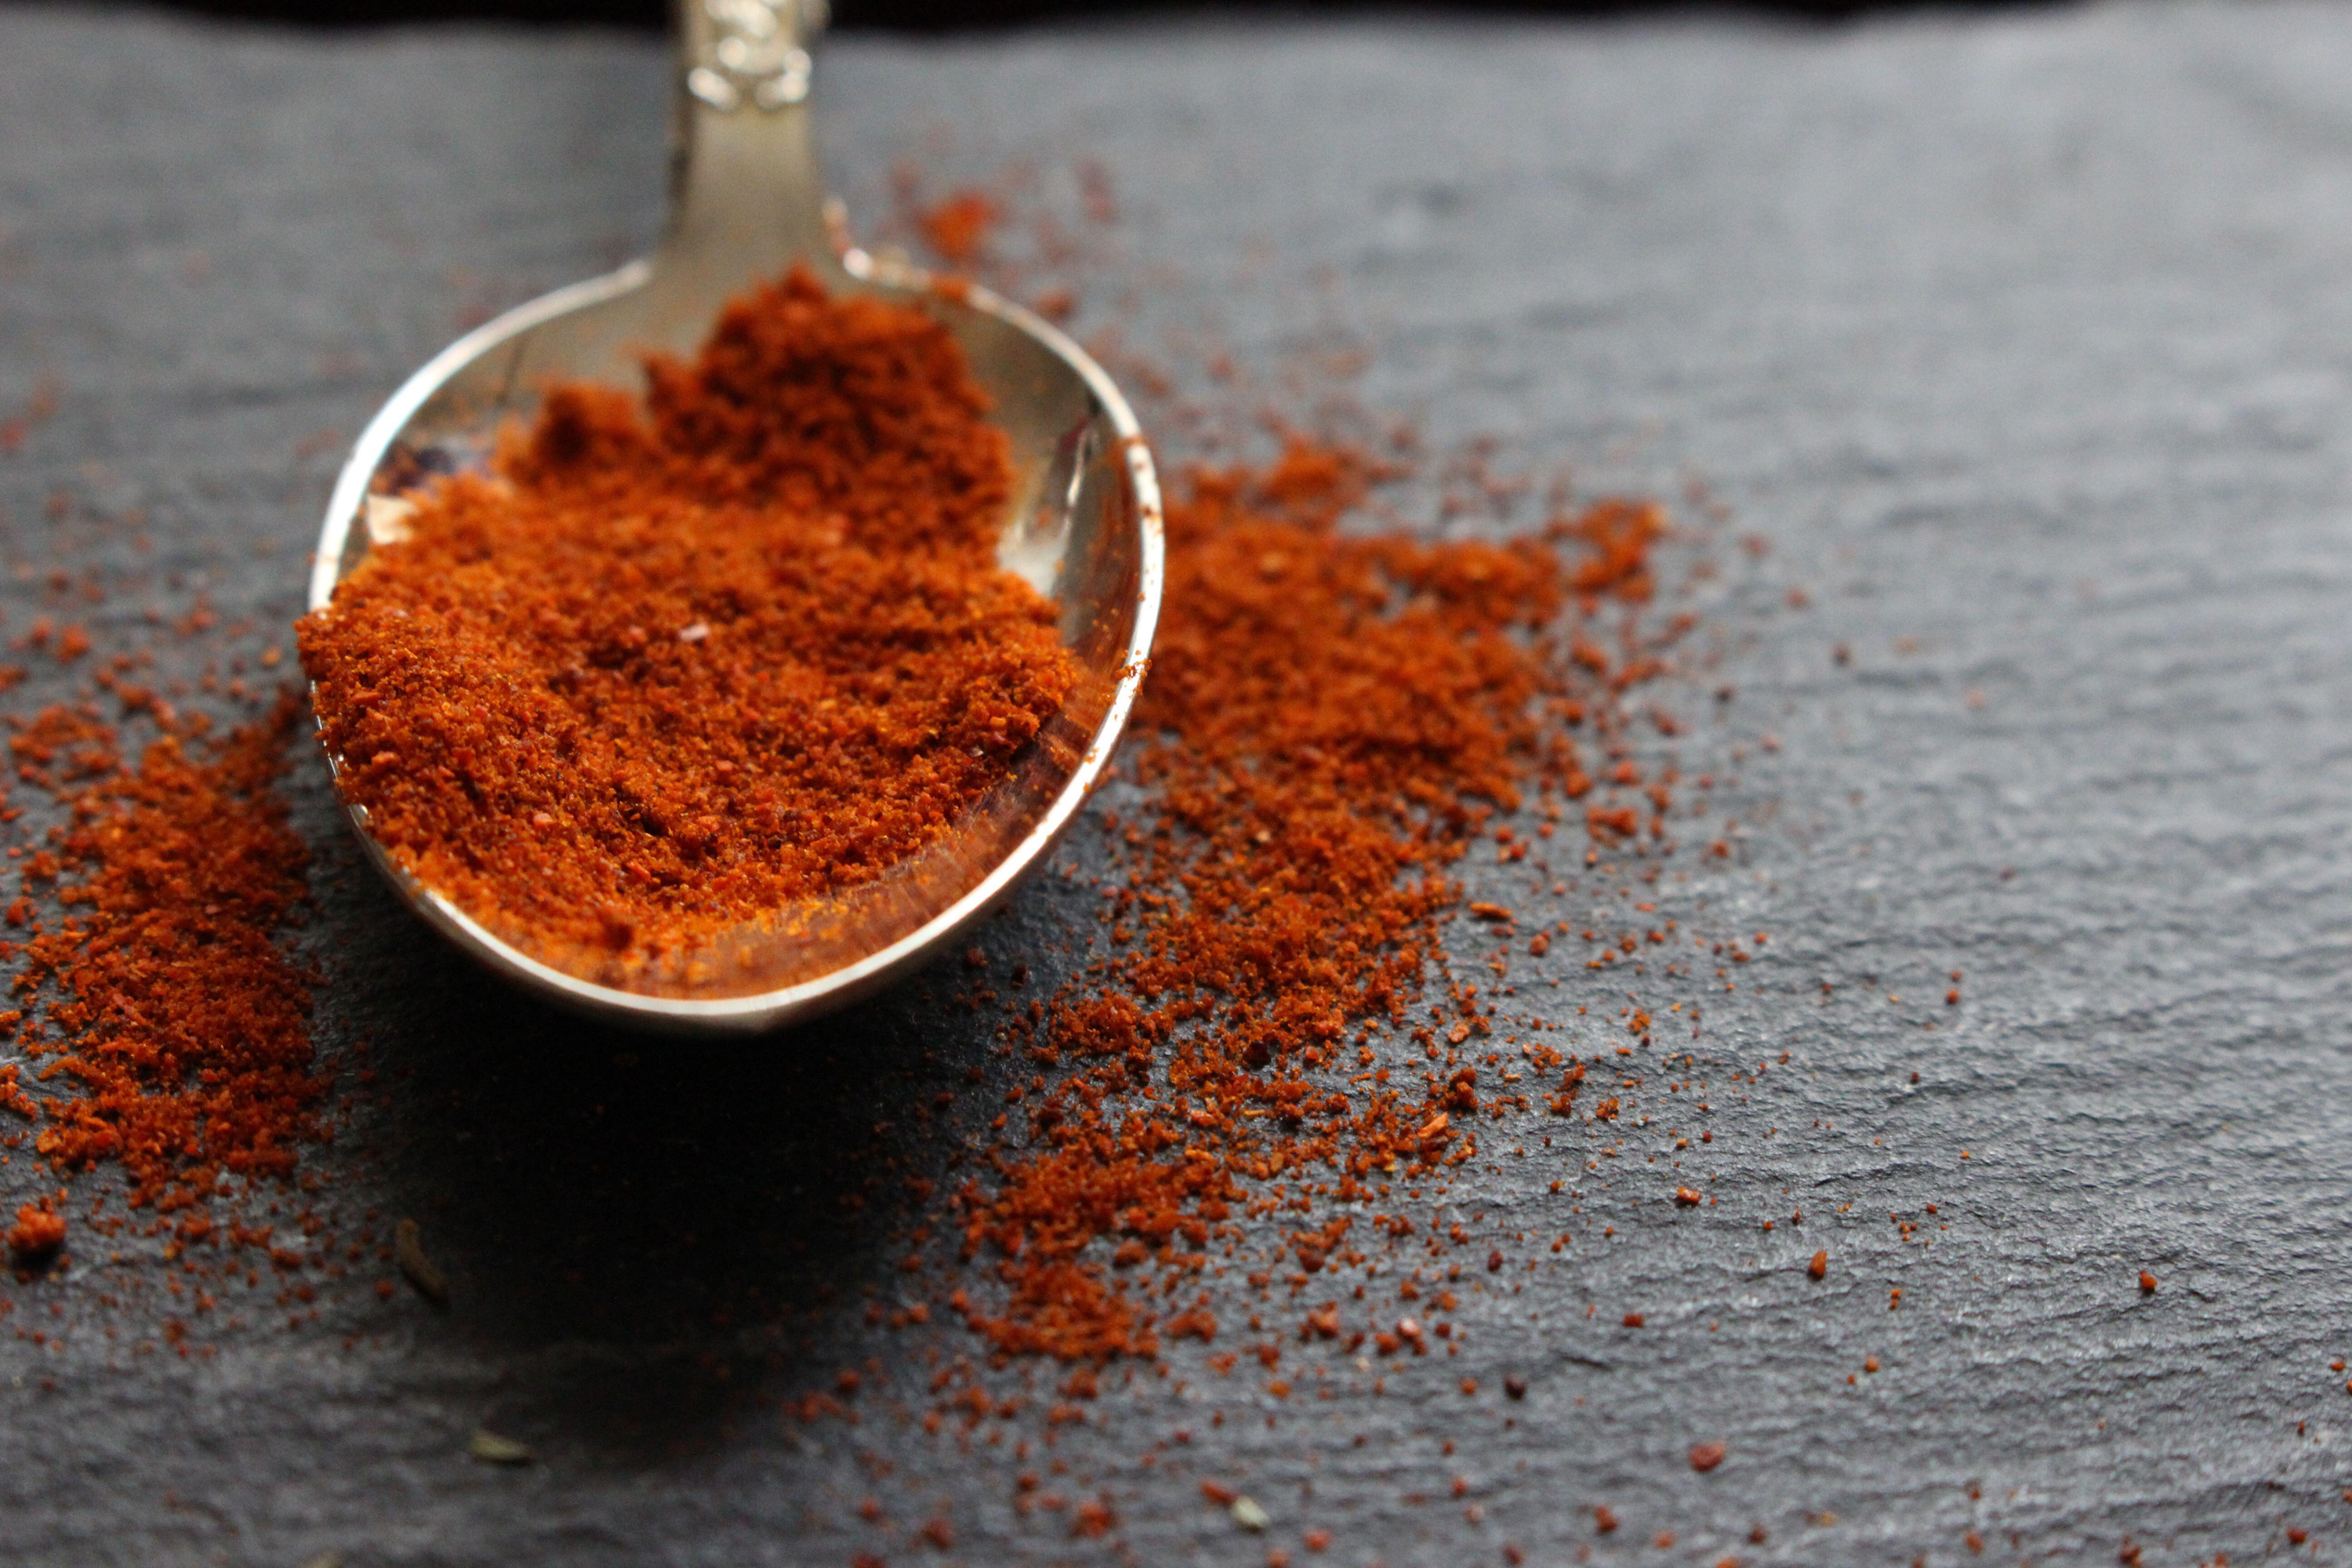 A spoonful of cayenne pepper